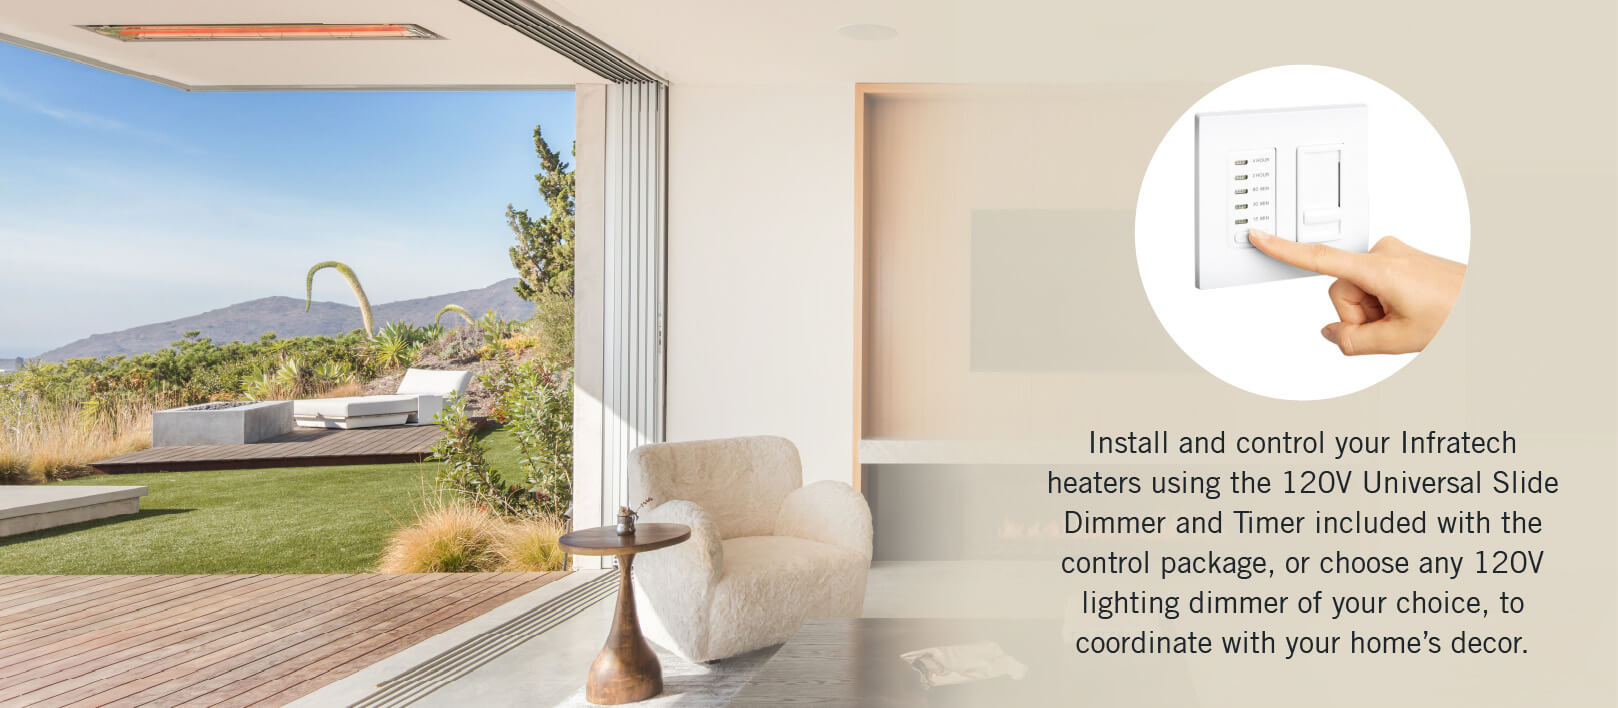 Install and control your Infratech heaters using the 120V Universal Slide Dimmer and Timer included with the control package, or choose any 120V lighting dimmer of your choice, to coordinate with your home’s decor.